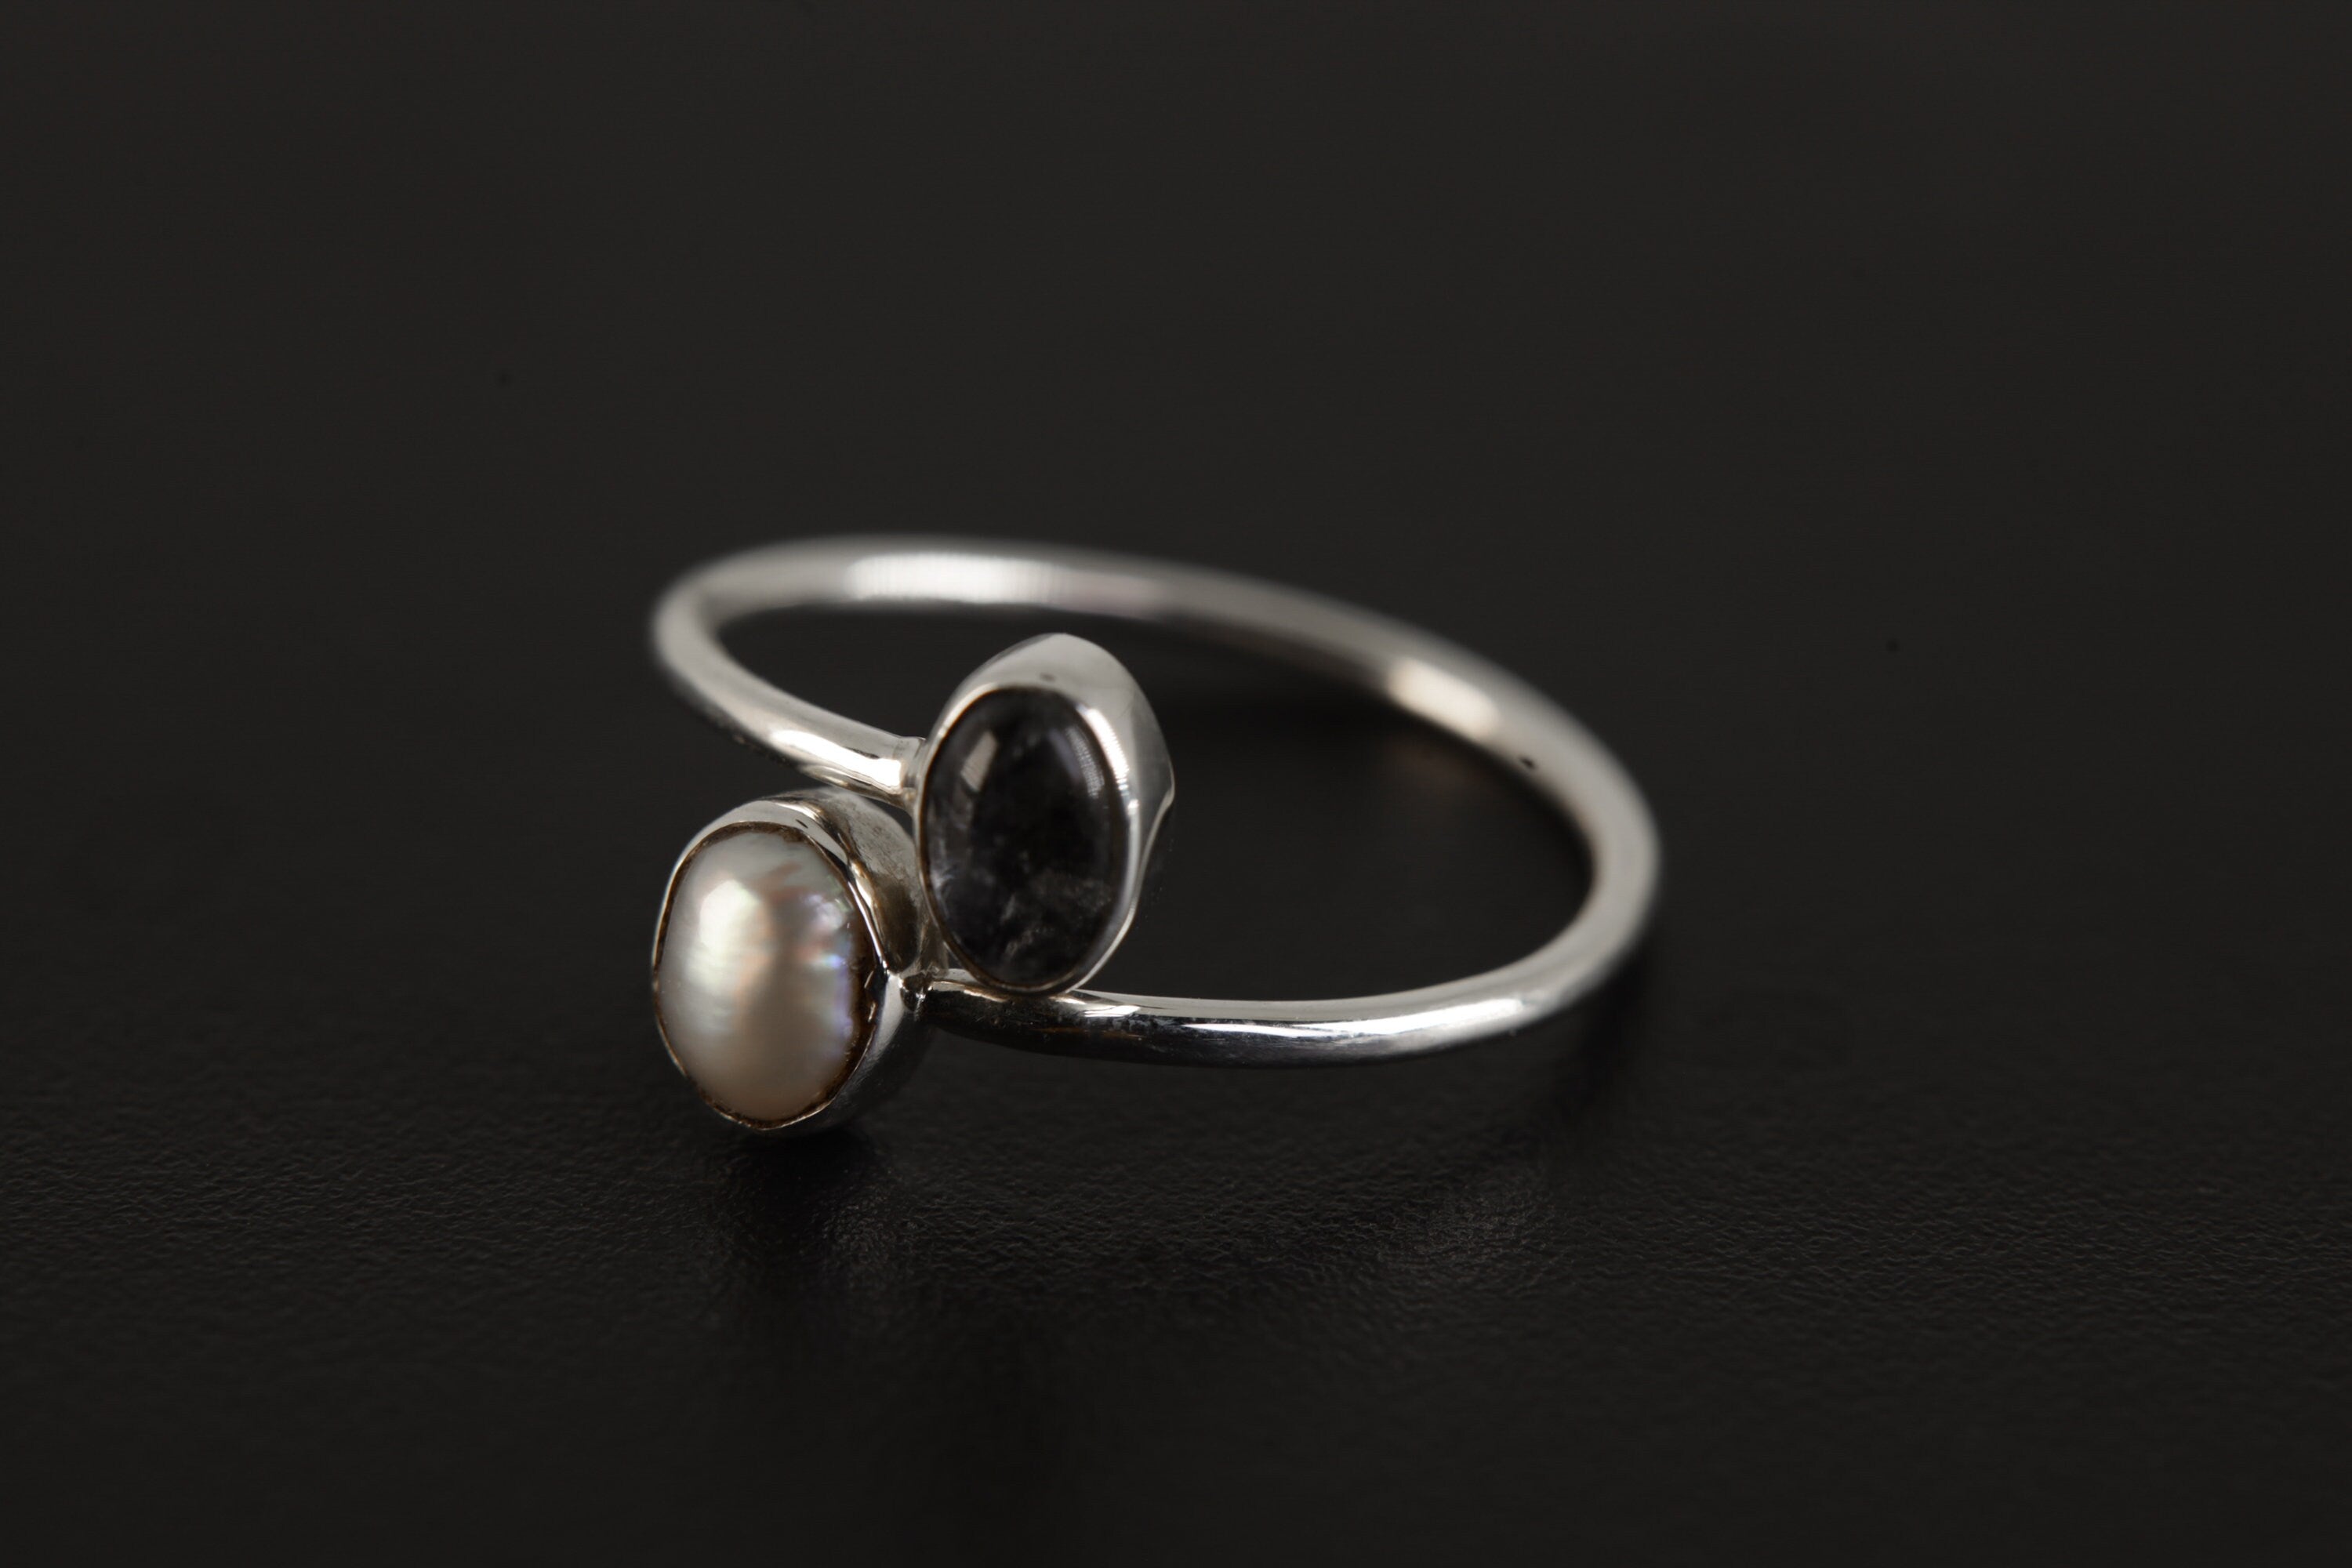 Lunar Pearl Crossroad Adjustable Ring- Sterling Silver Ring - With Blue Moonstone & Pearl -Unisex - Size 5-12 US